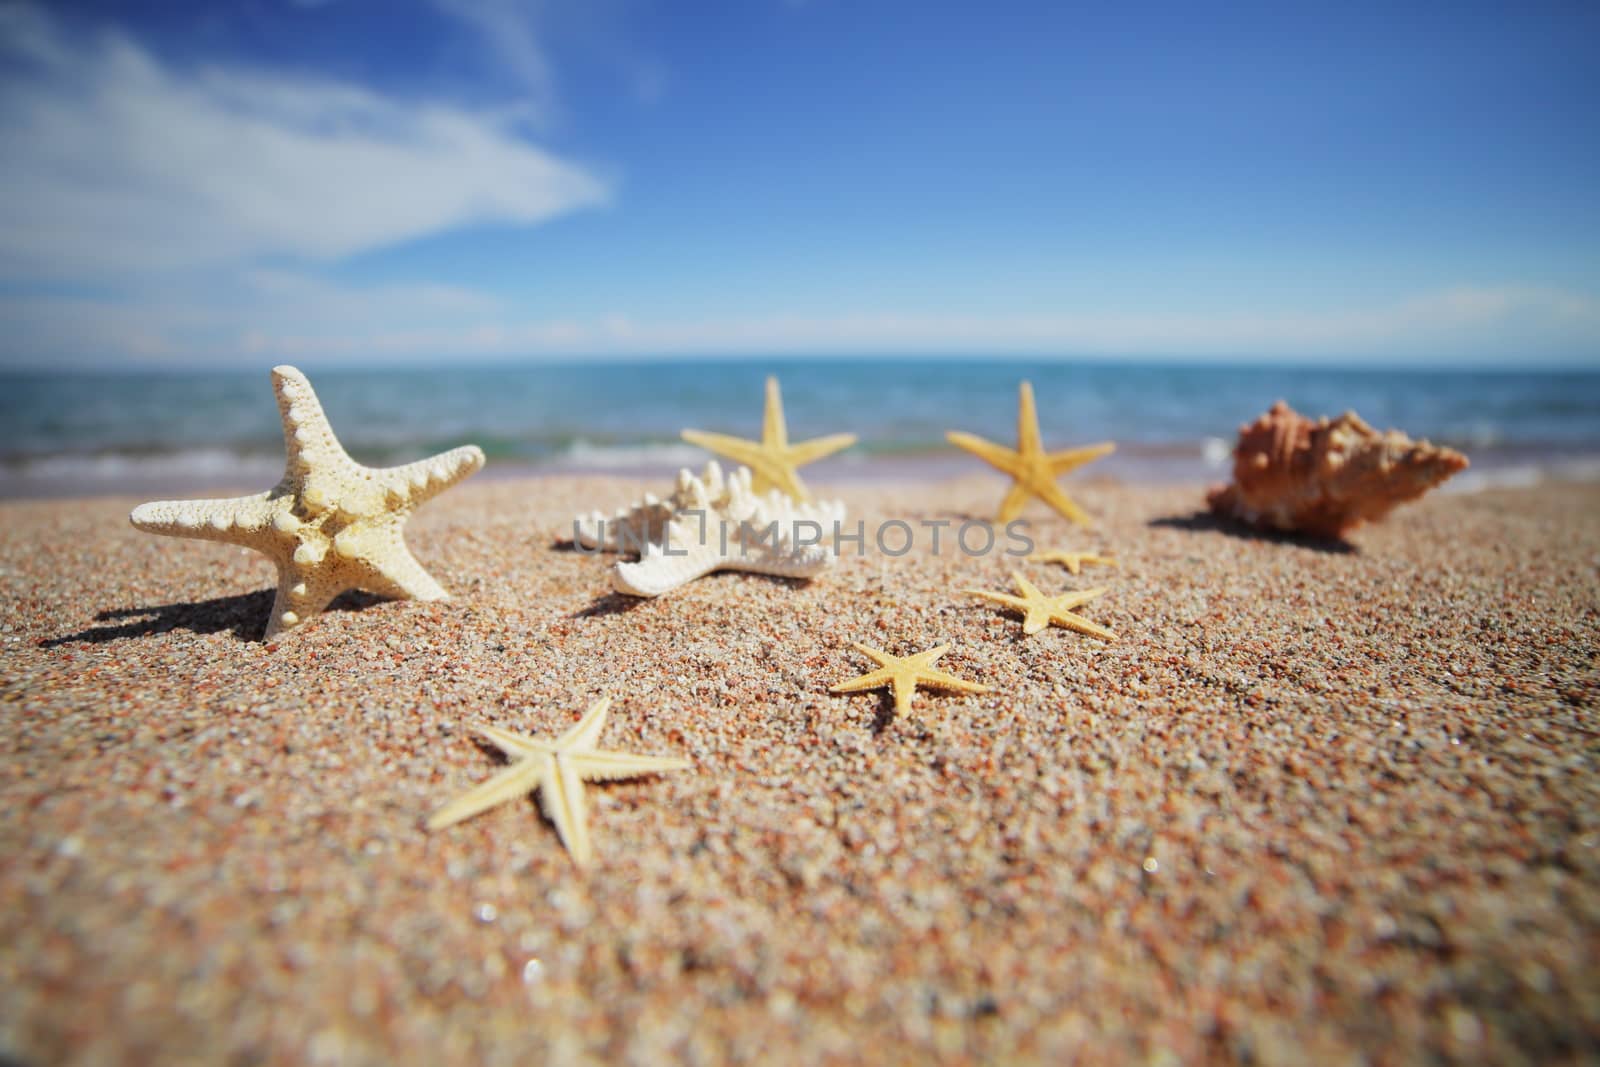 Sea shells and starfish on the beach. Sandy beach with waves. Summer vacation concept. Holidays by the sea. High quality photo